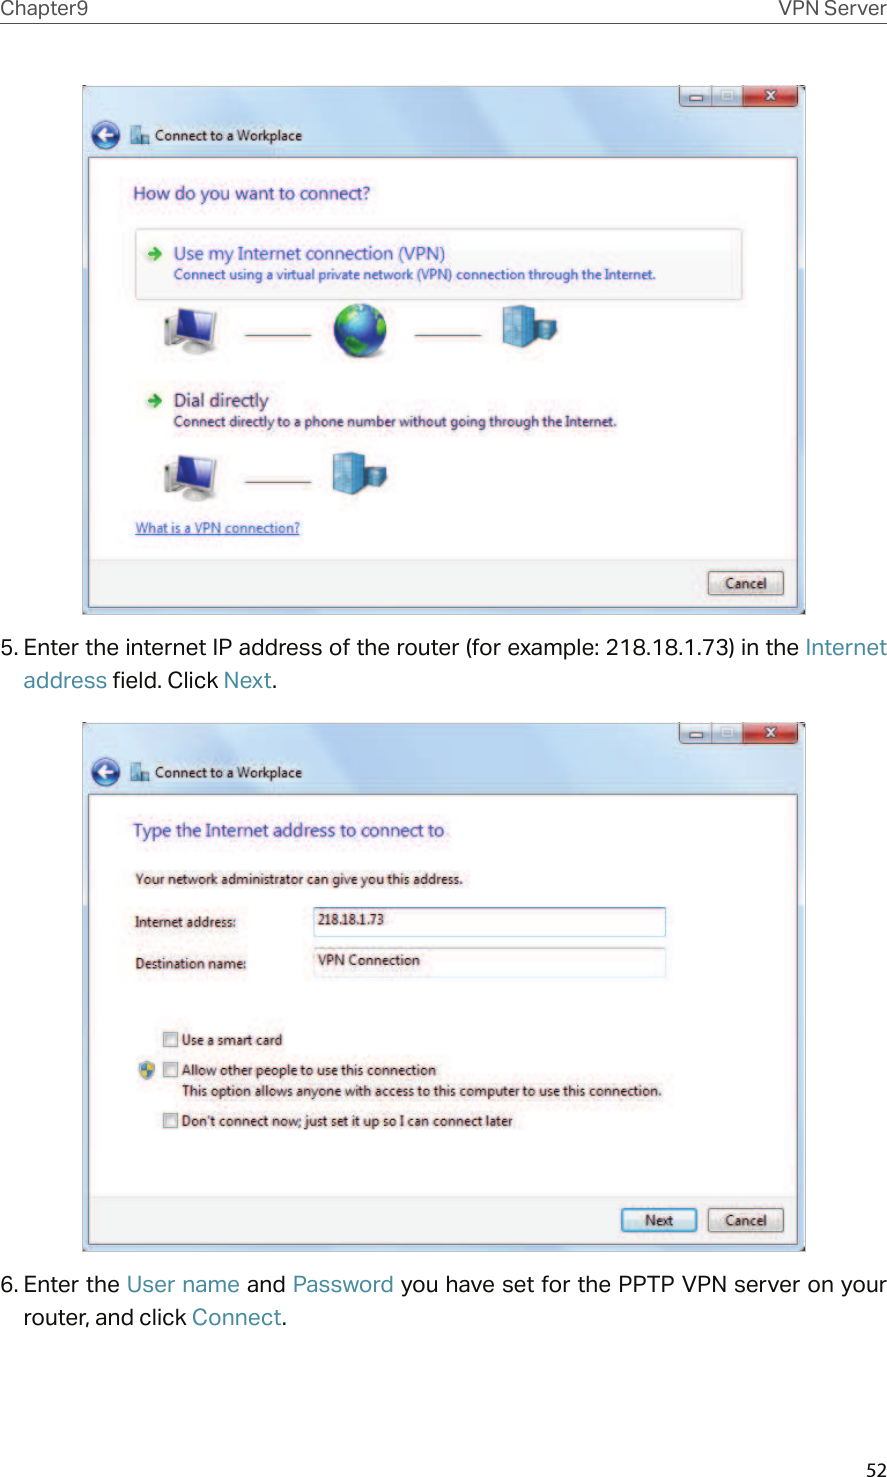 52Chapter9 VPN Server5. Enter the internet IP address of the router (for example: 218.18.1.73) in the Internet address field. Click Next.6. Enter the User name and Password you have set for the PPTP VPN server on your router, and click Connect.